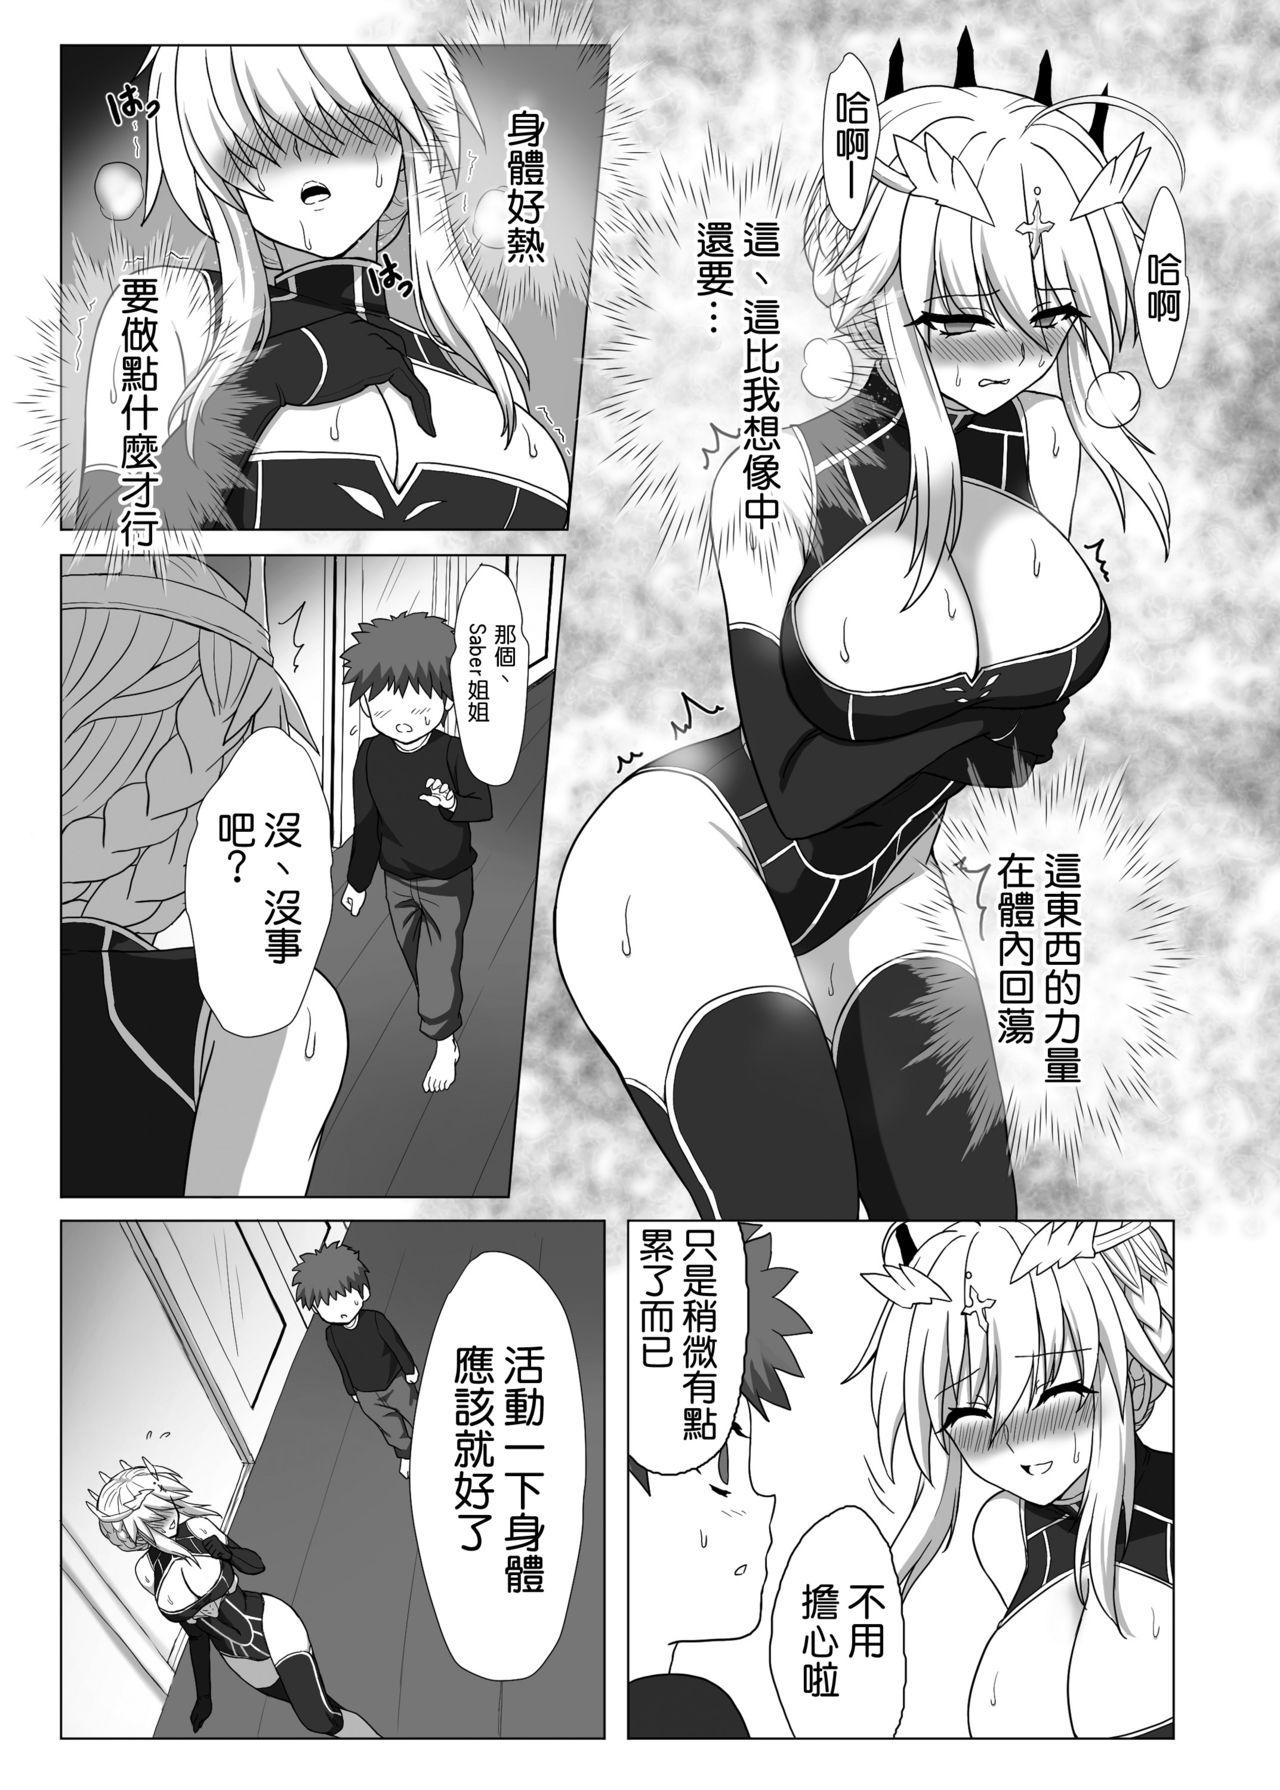 Skirt Fate/NTR - Fate grand order Time - Page 11